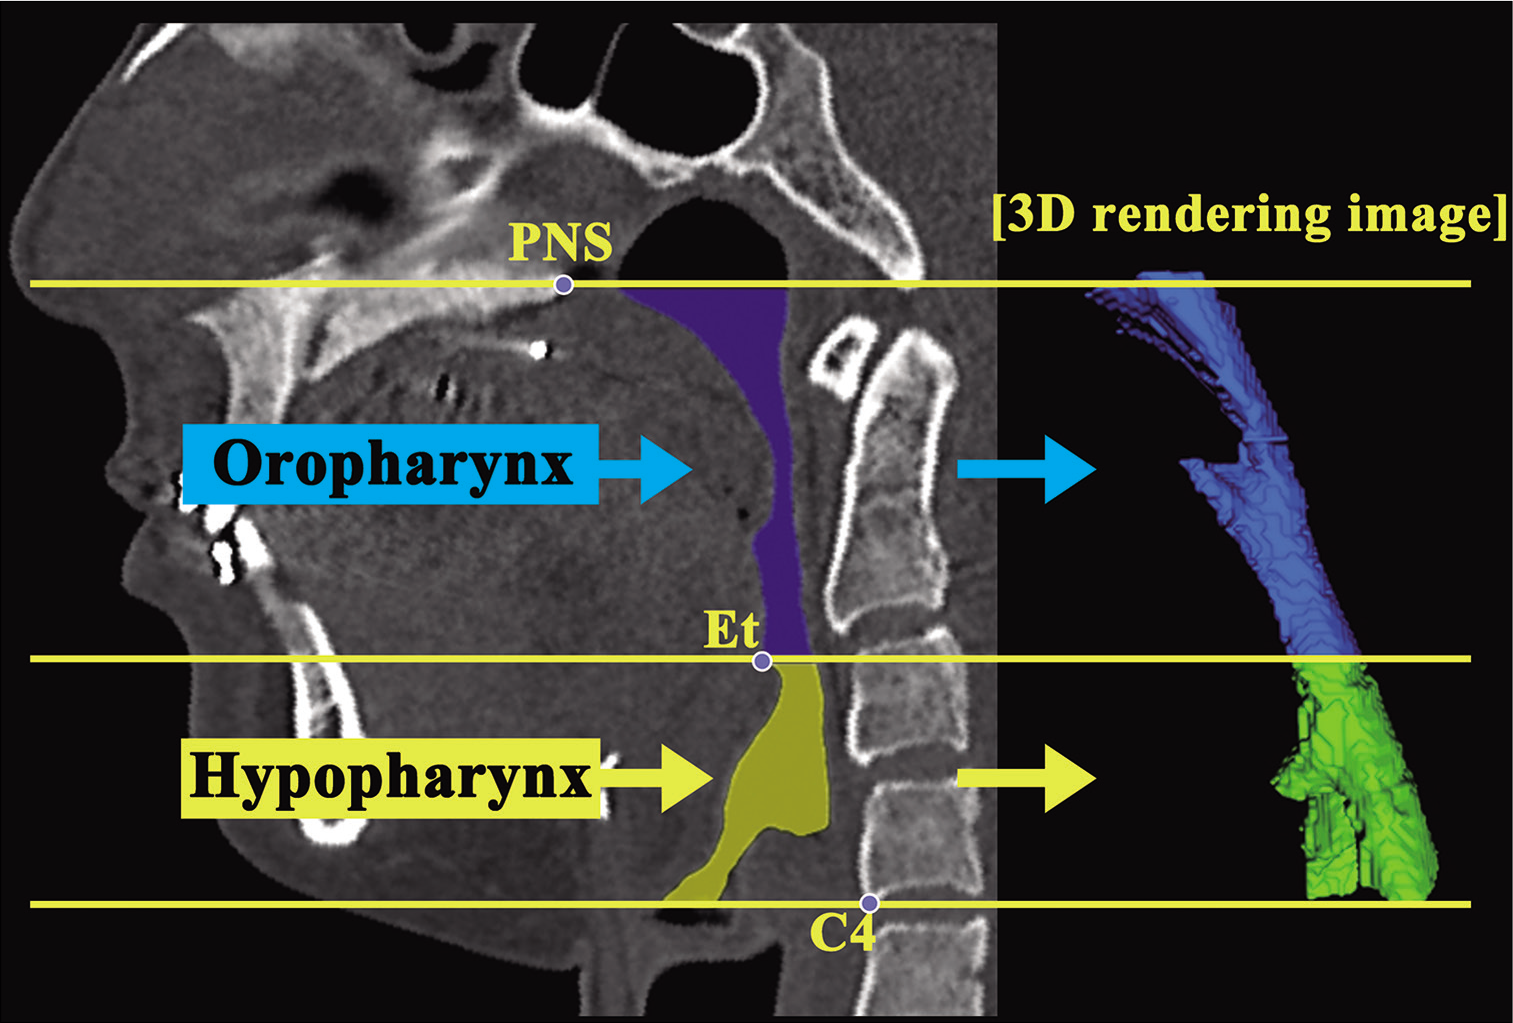 An example of a three-dimensional image of the upper airway, oropharynx, and hypopharynx.